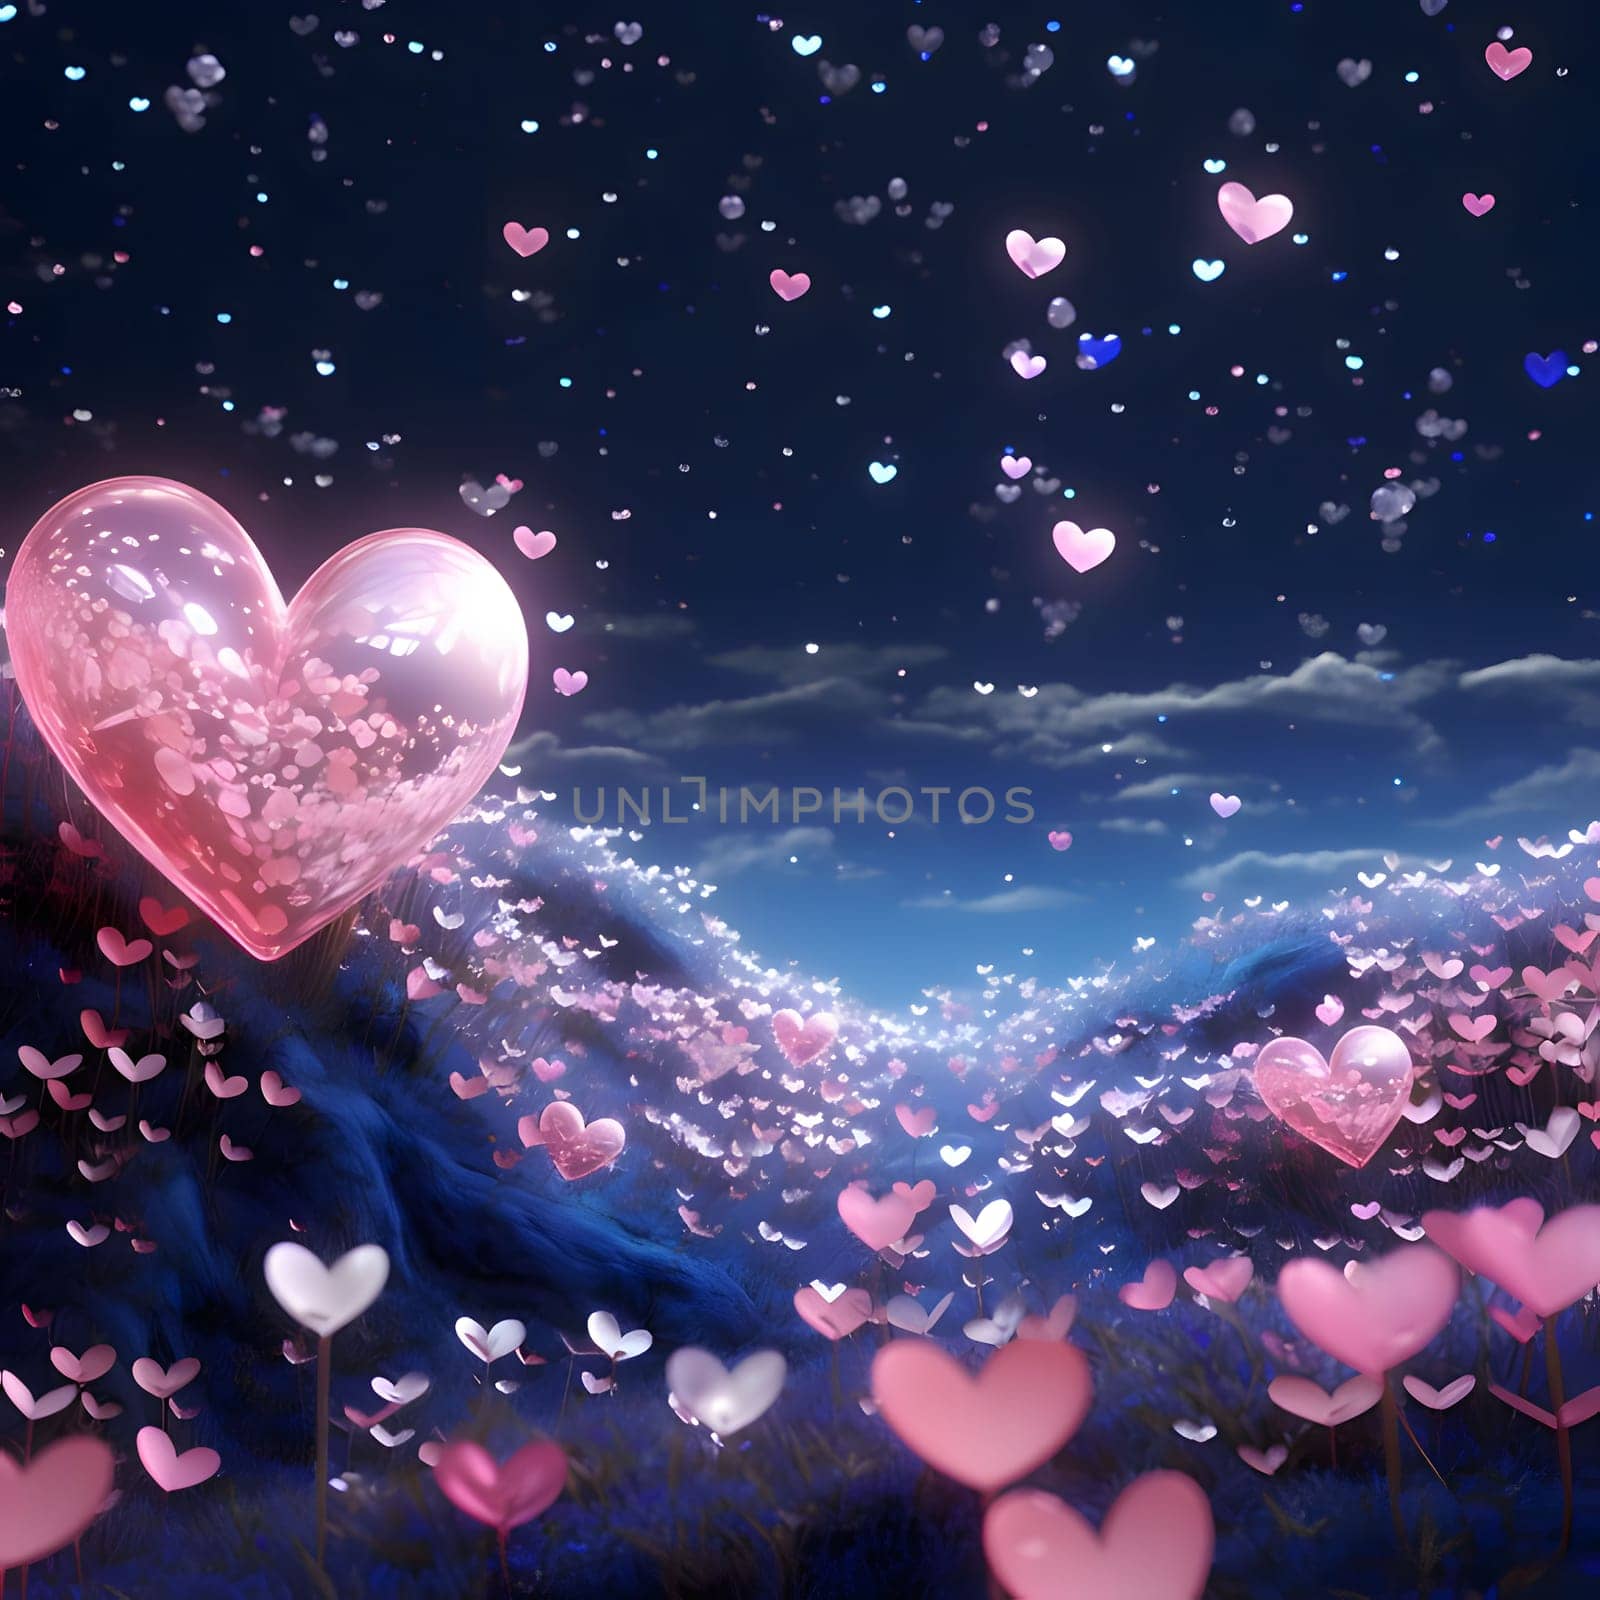 Flowers with pink hearts, at night in the clearing and sky. Heart as a symbol of affection and love. The time of falling in love and love.